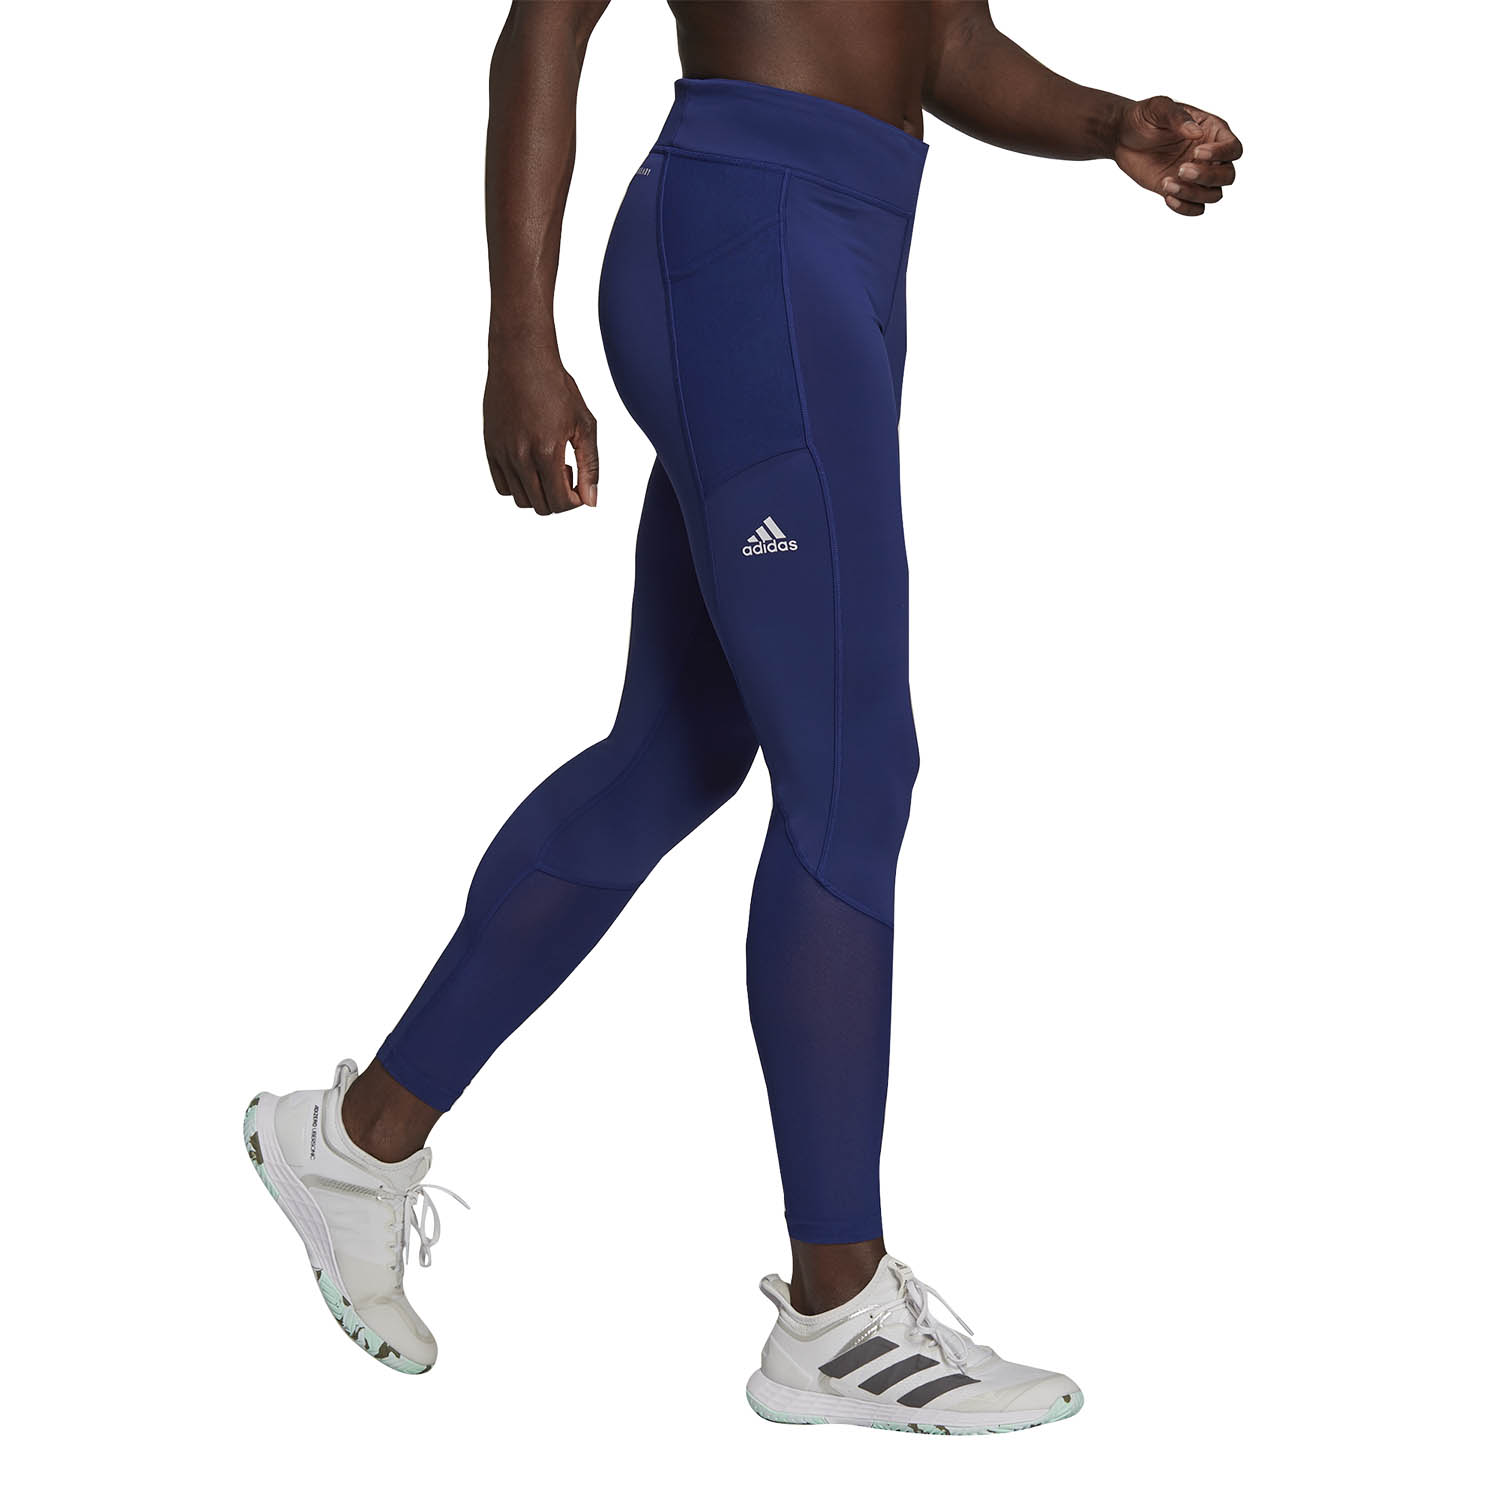 adidas Match Women's Tennis Tights - Victory Blue/White